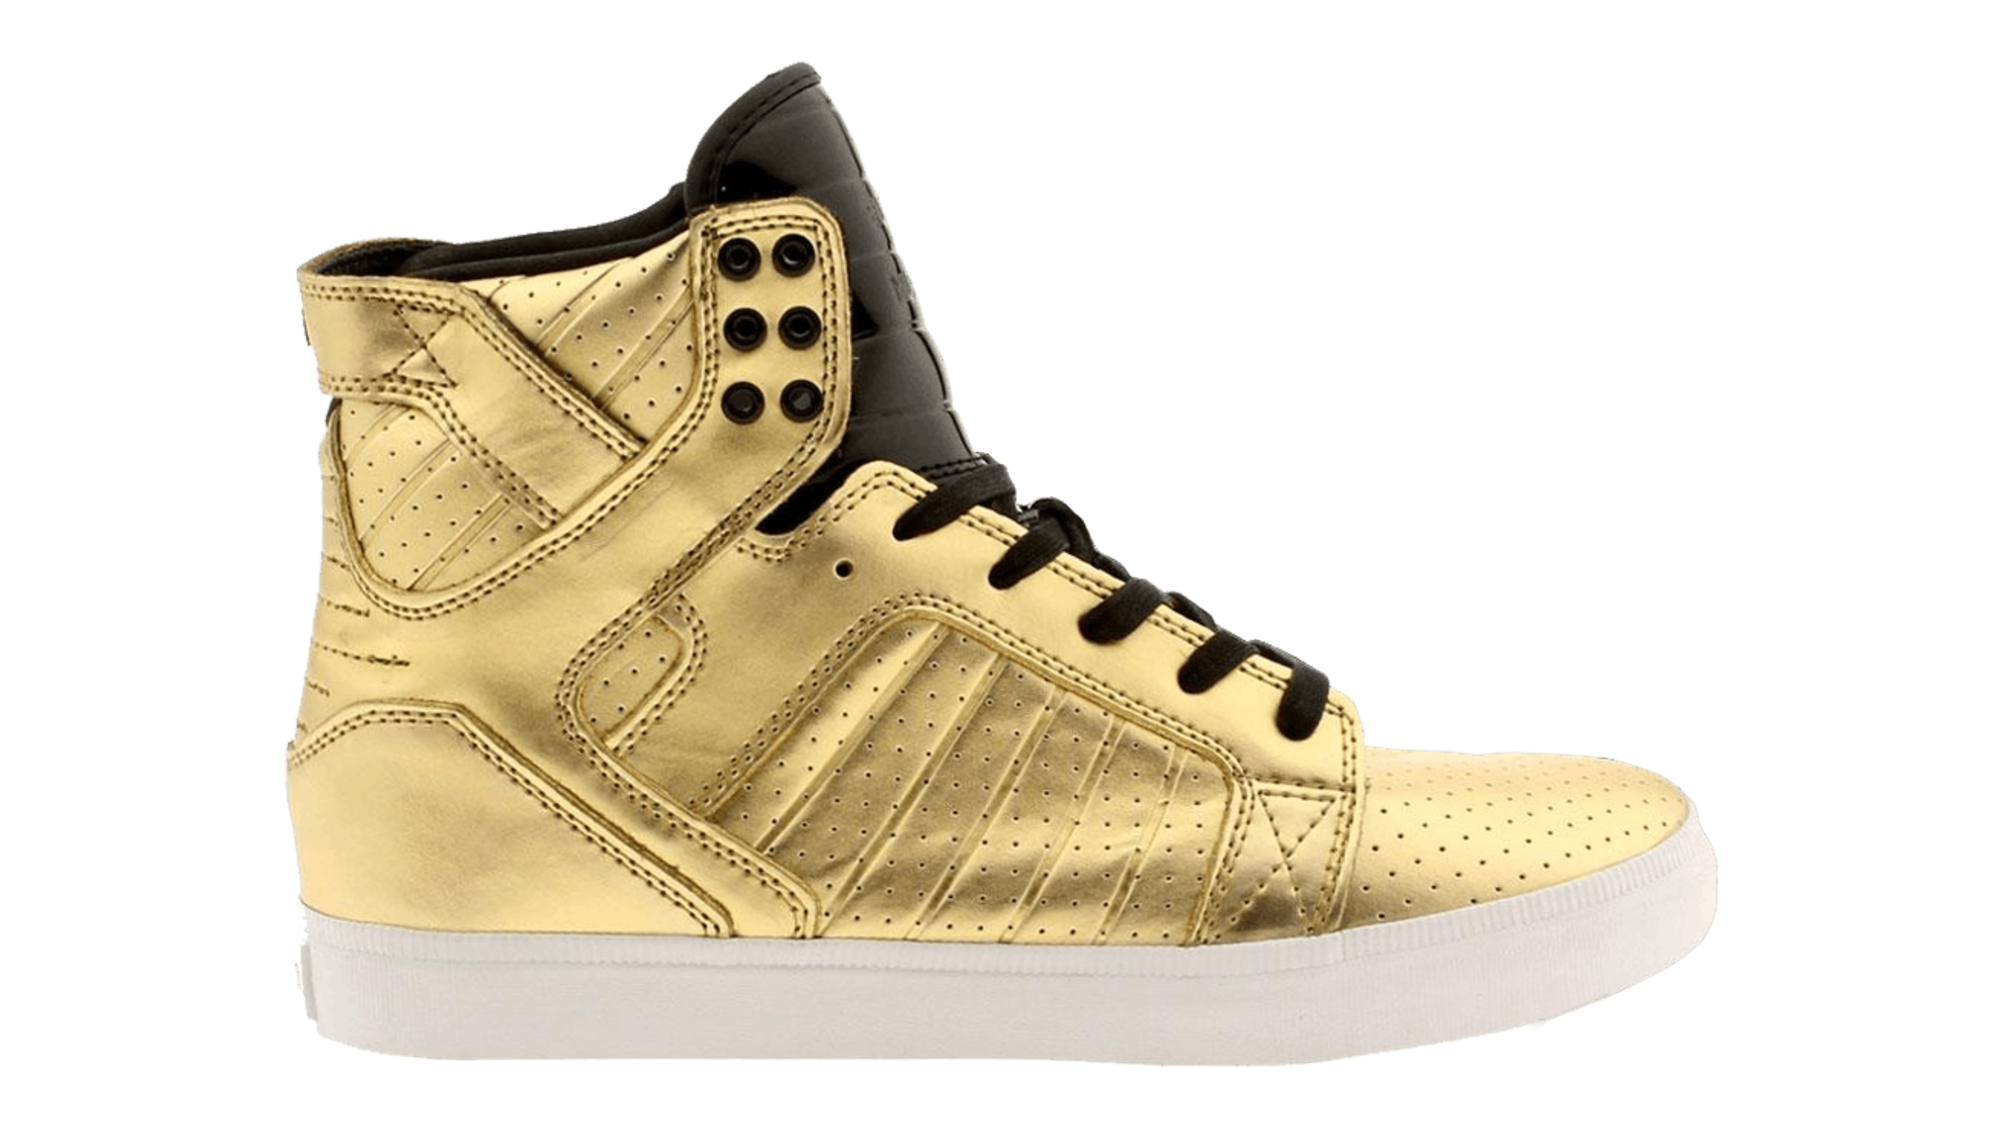 Sabroso Milímetro Chaise longue Womens Brown Hiking Shoe | Supra, Prices & Collaborations | Release Dates |  Sneaker Calendar, Supra Skytop LS "Gold"